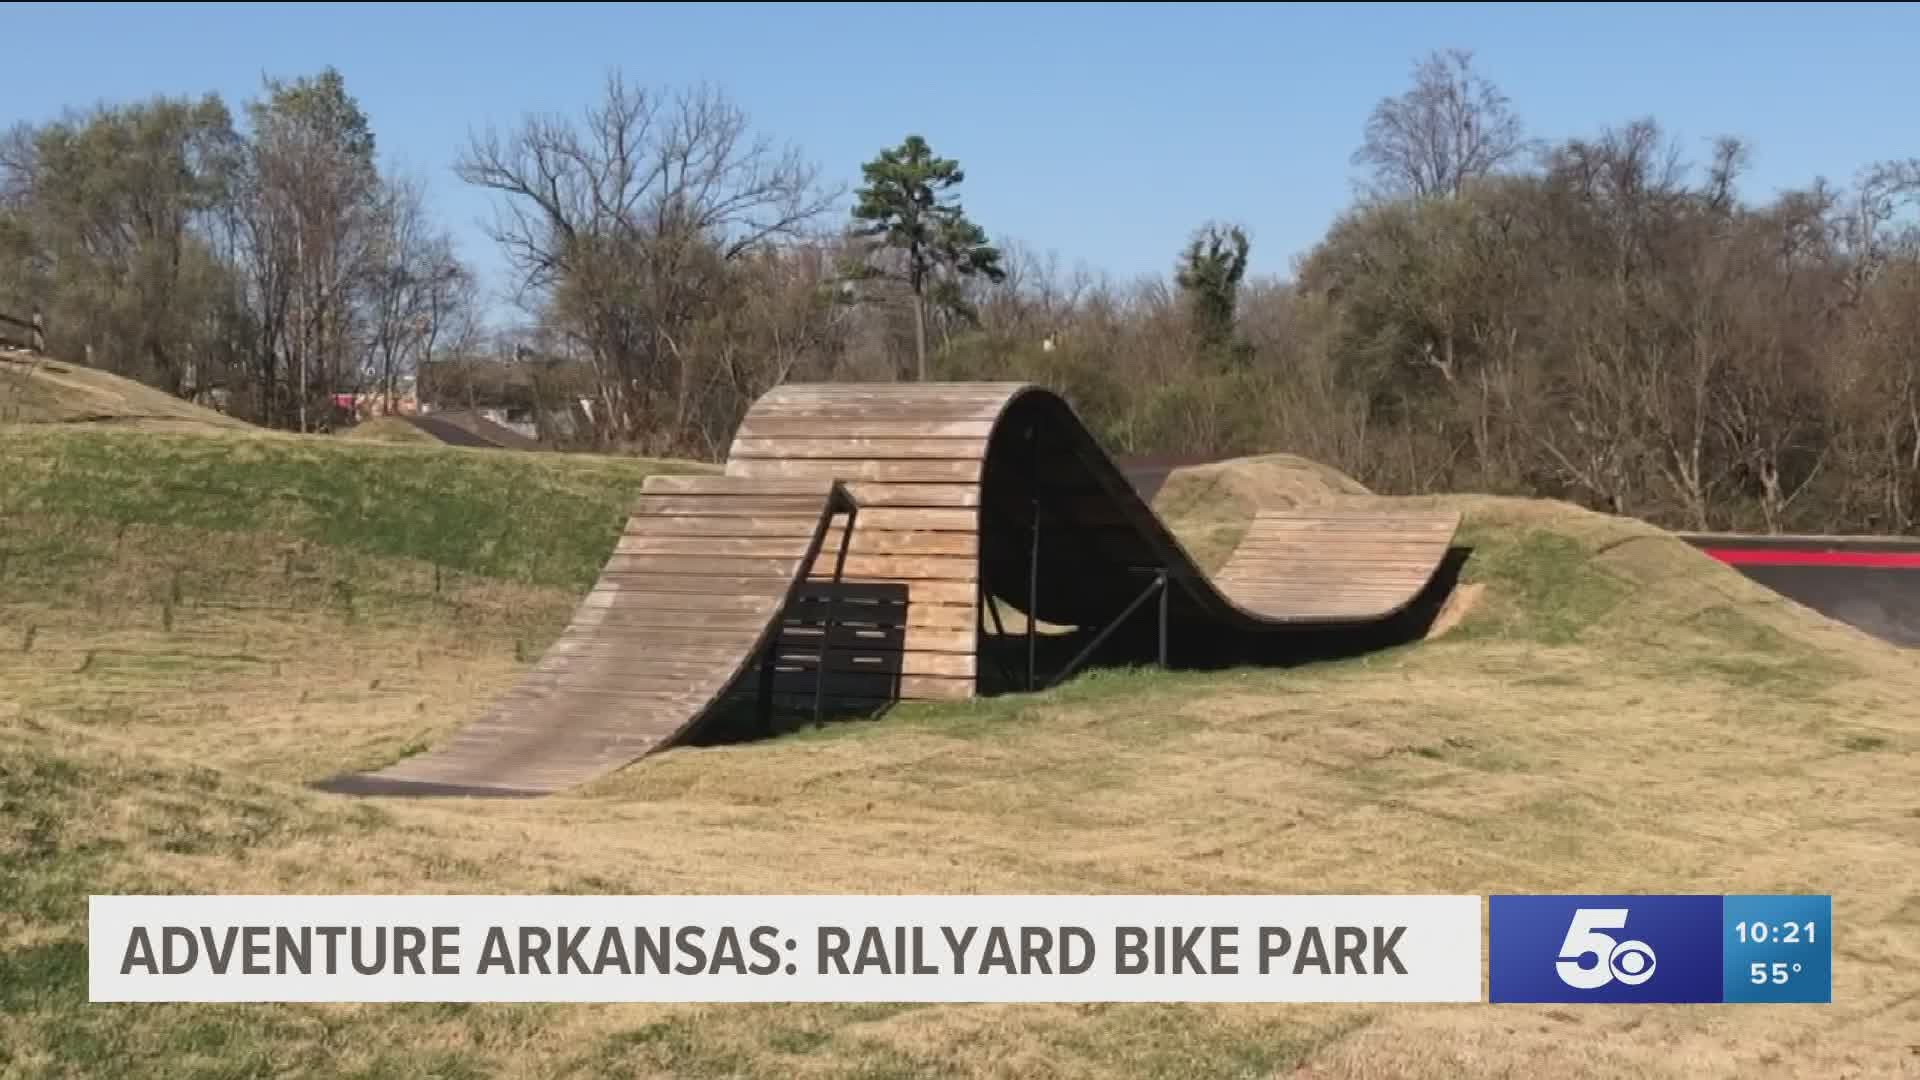 The bike park is part of the larger Lake Atalanta recreational area which encompasses 236 acres.